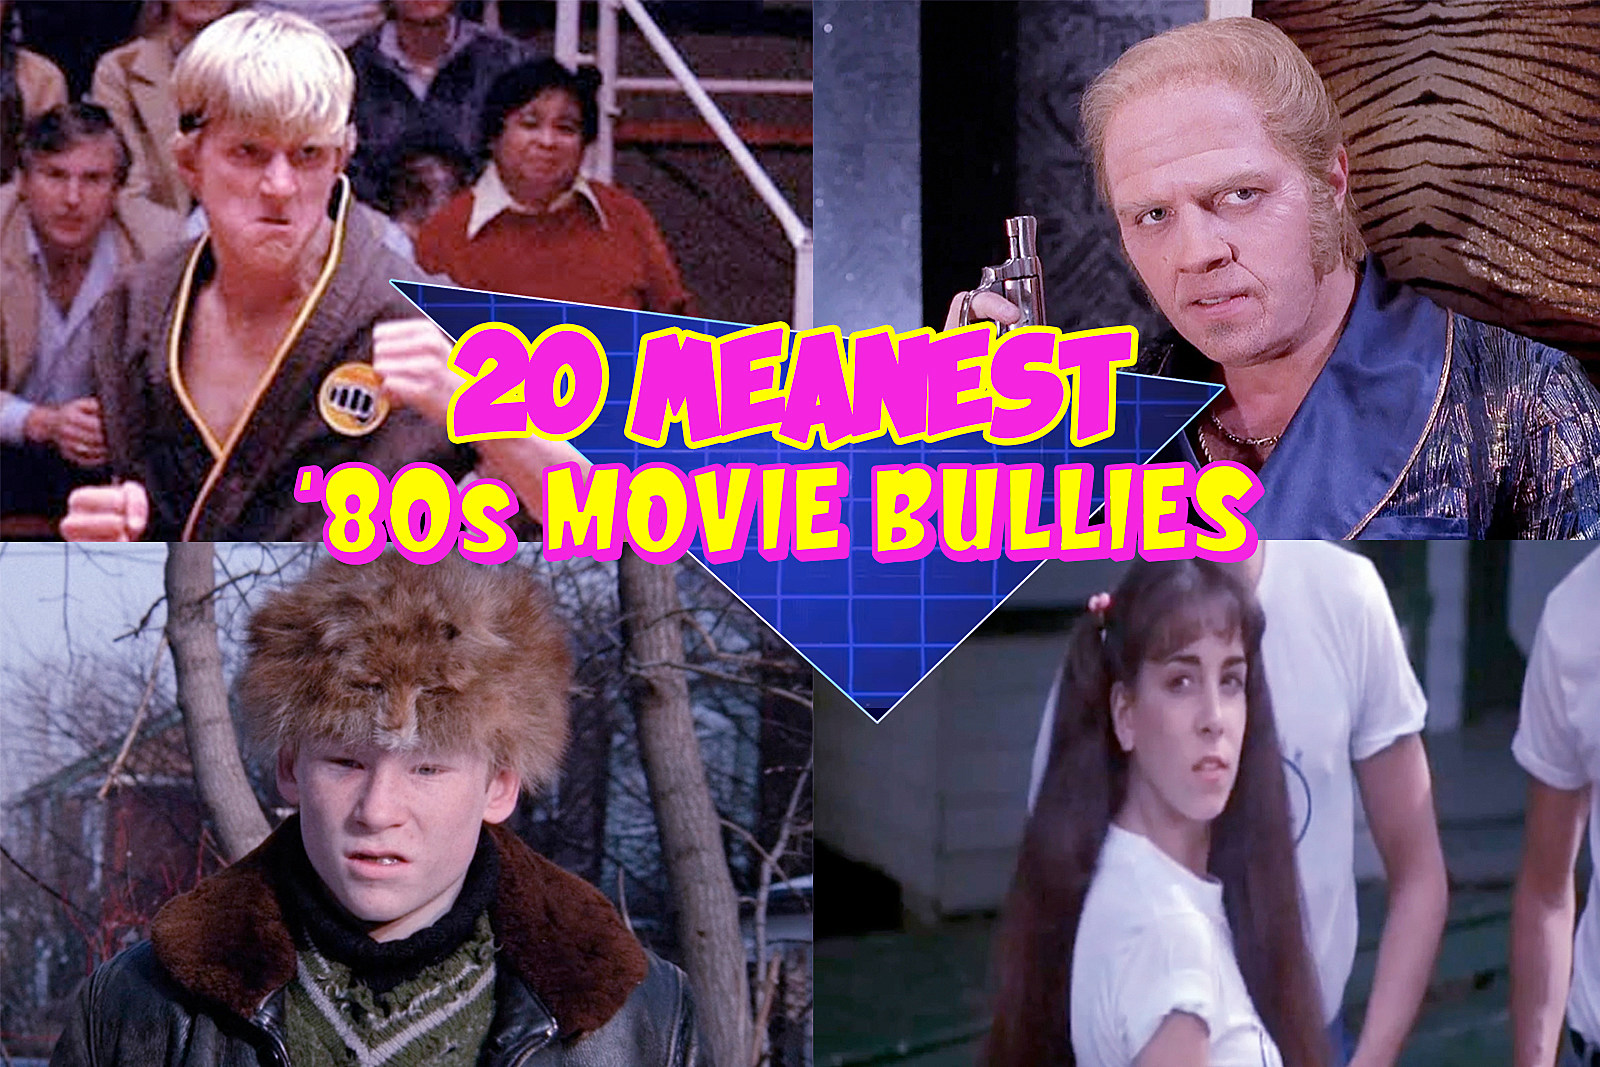 The 20 Meanest '80s Movie Bullies